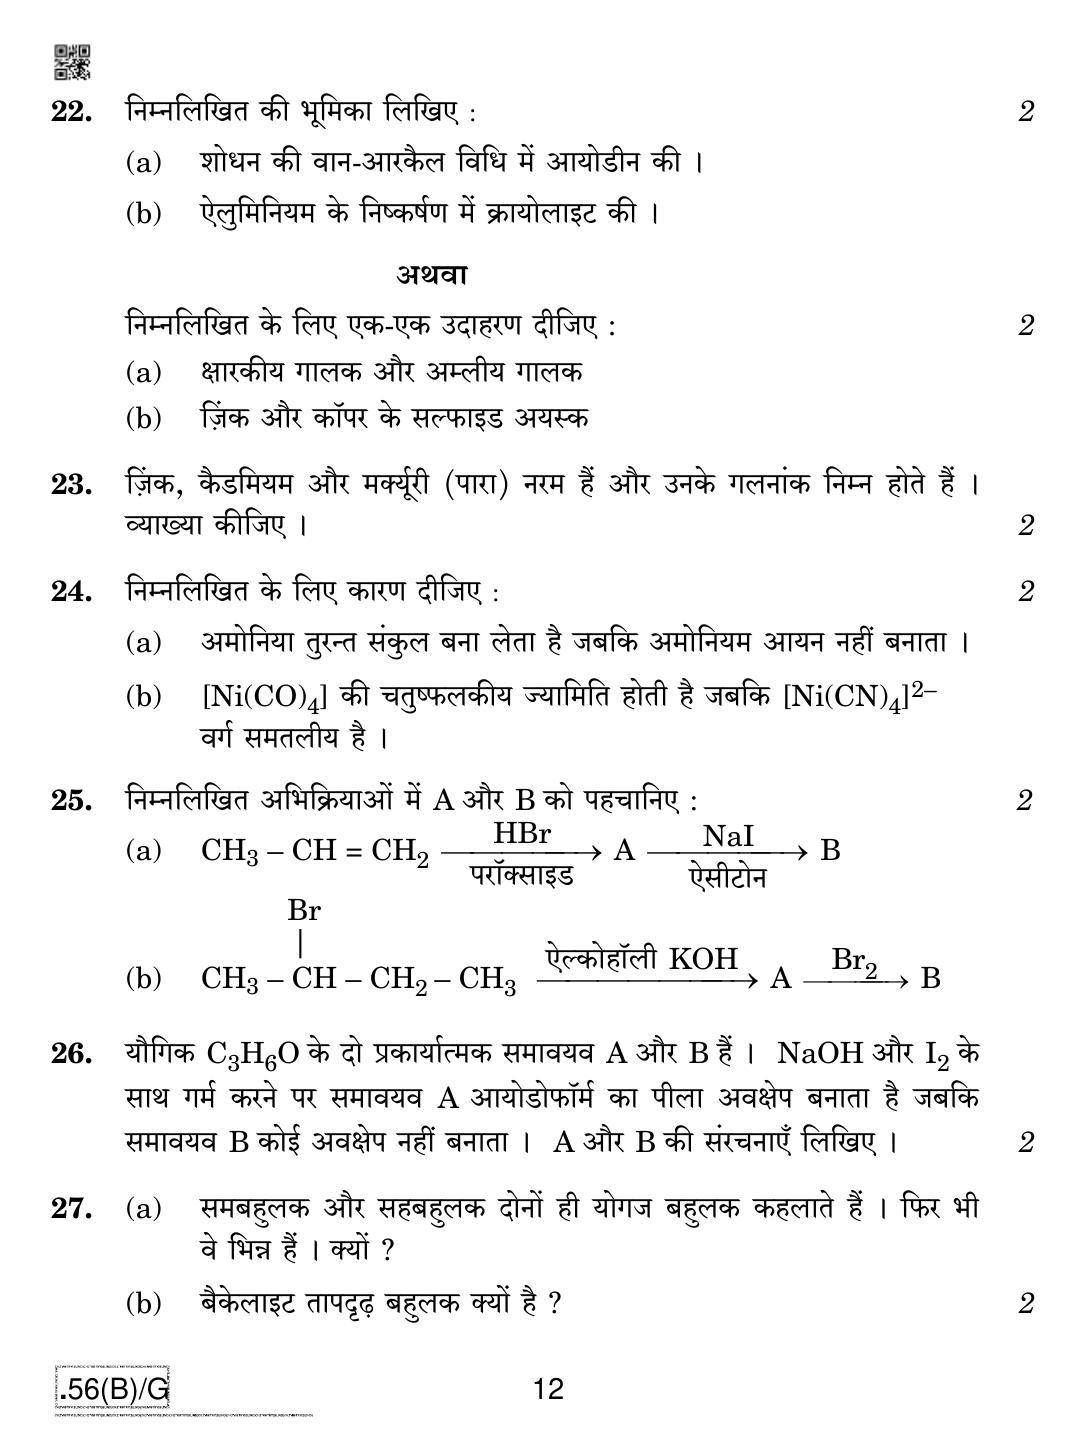 CBSE Class 12 56(B)-C - Chemistry For Blind Candidates 2020 Compartment Question Paper - Page 12